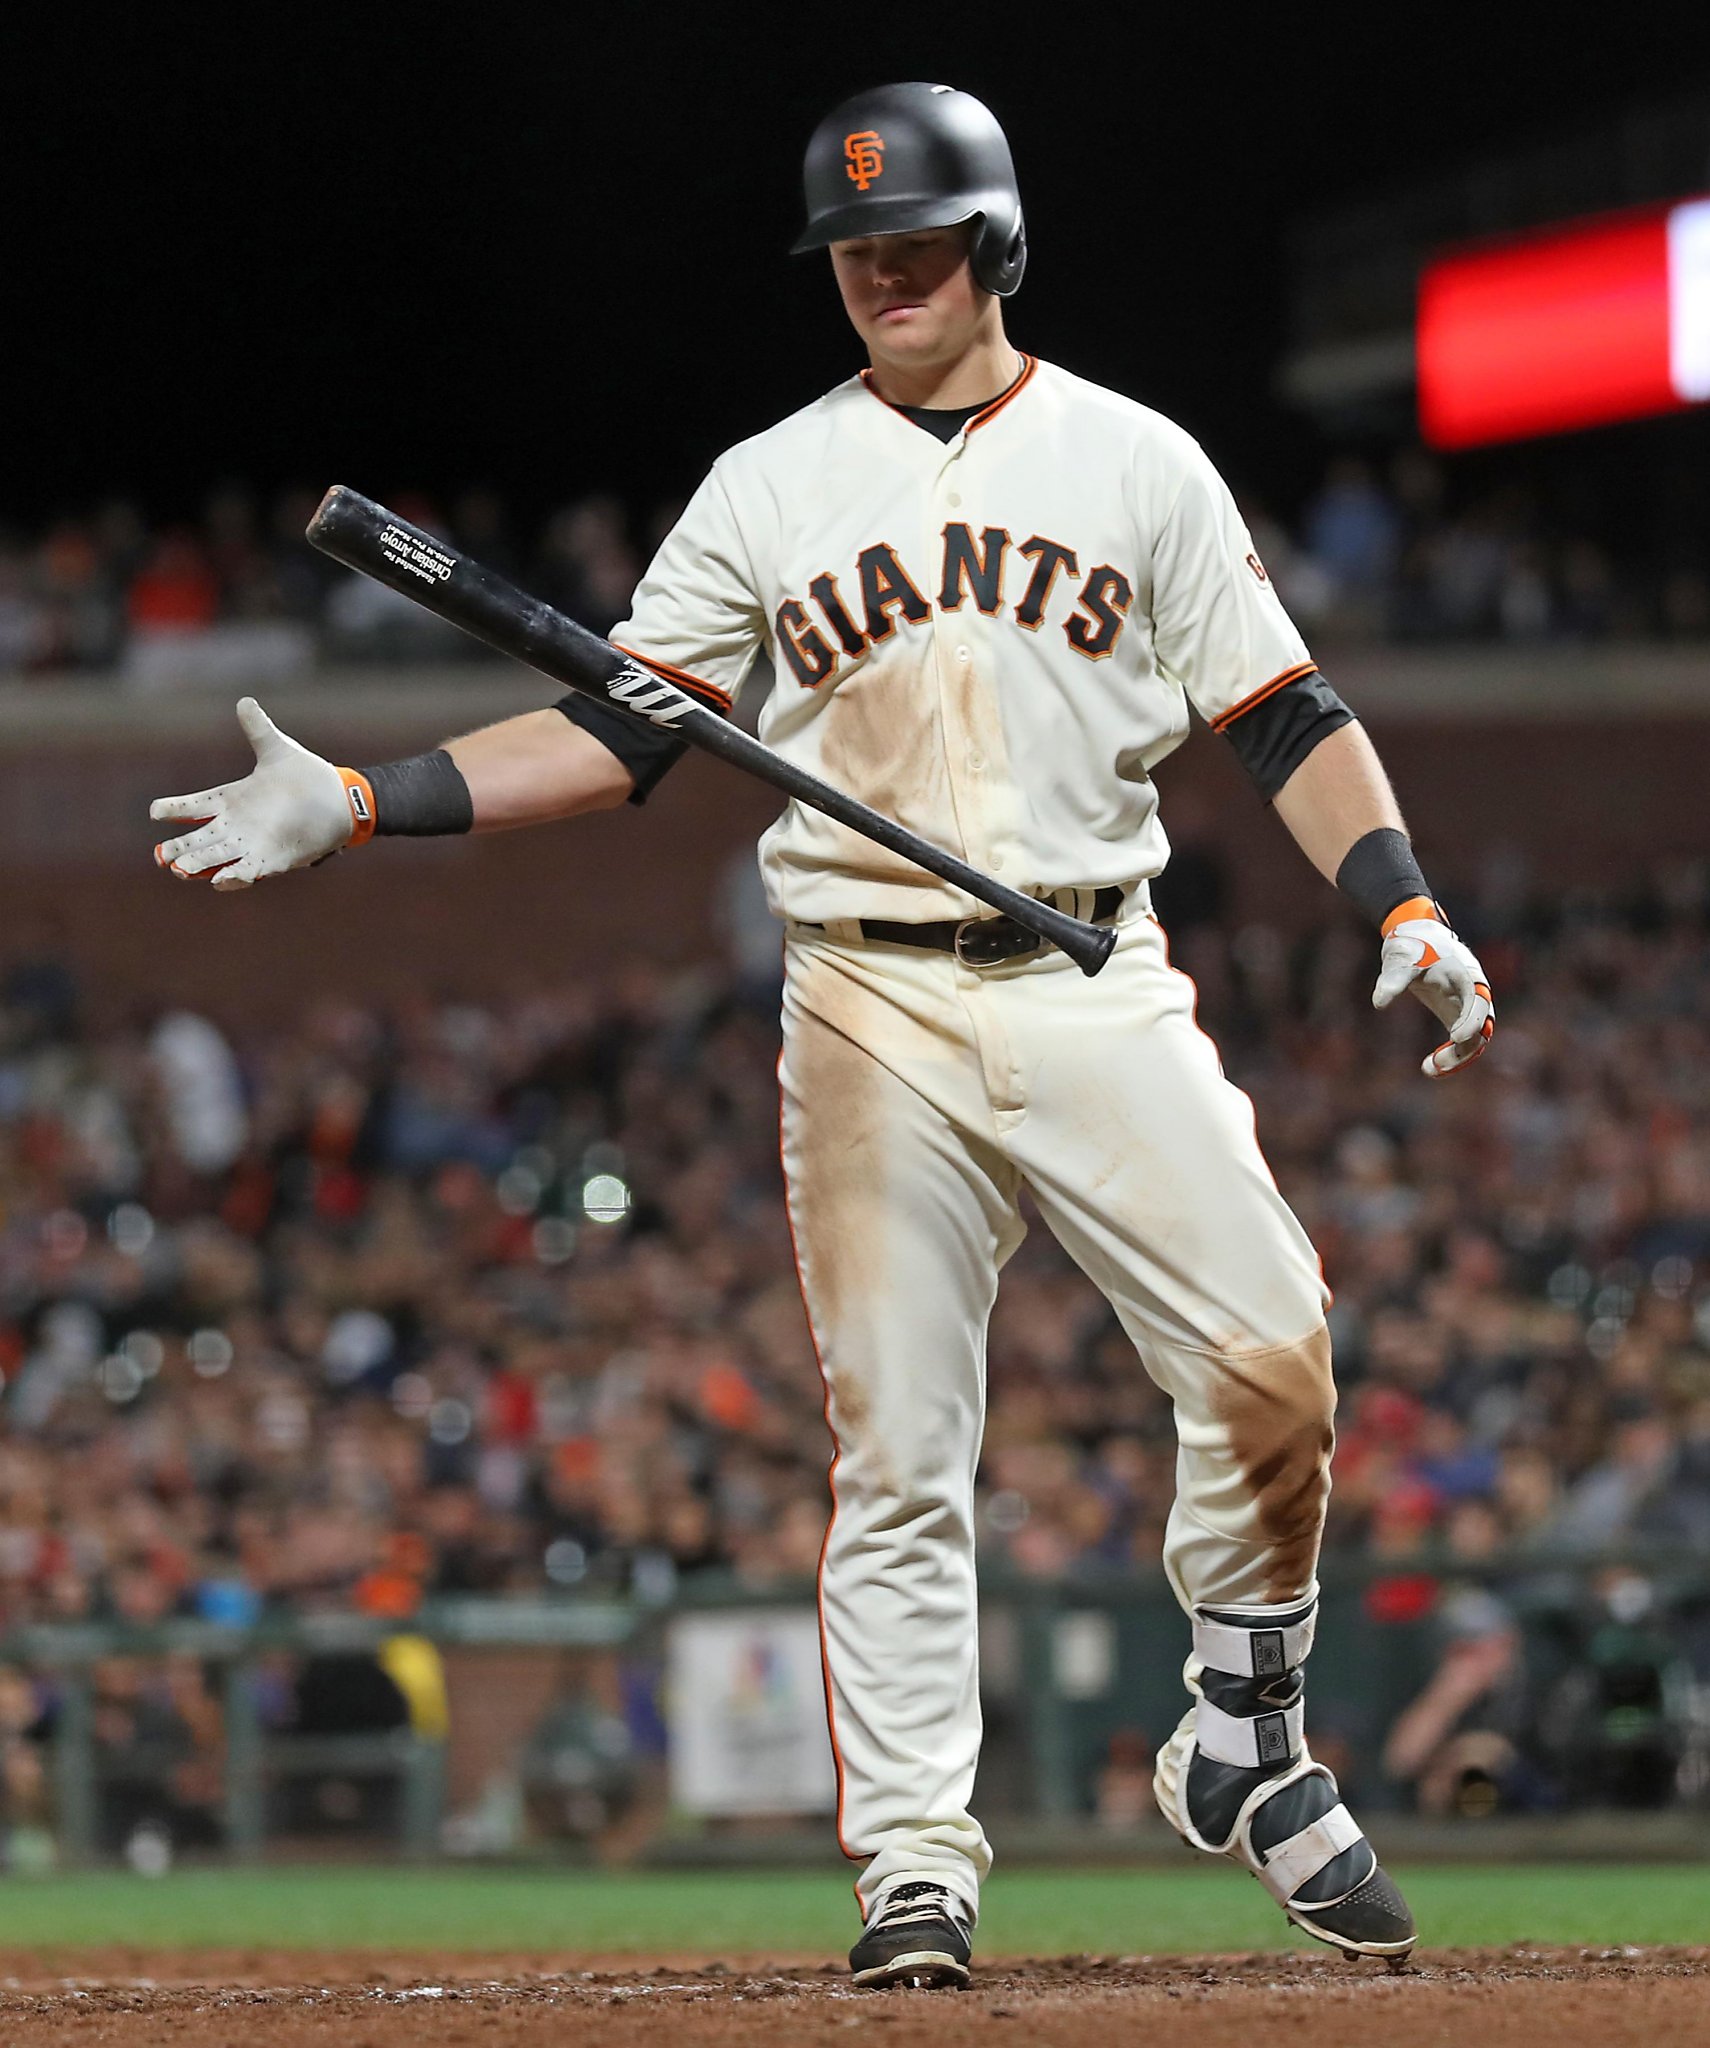 Bye bye, baby: Christian Arroyo's home run lifts Giants to victory over  Padres – East Bay Times